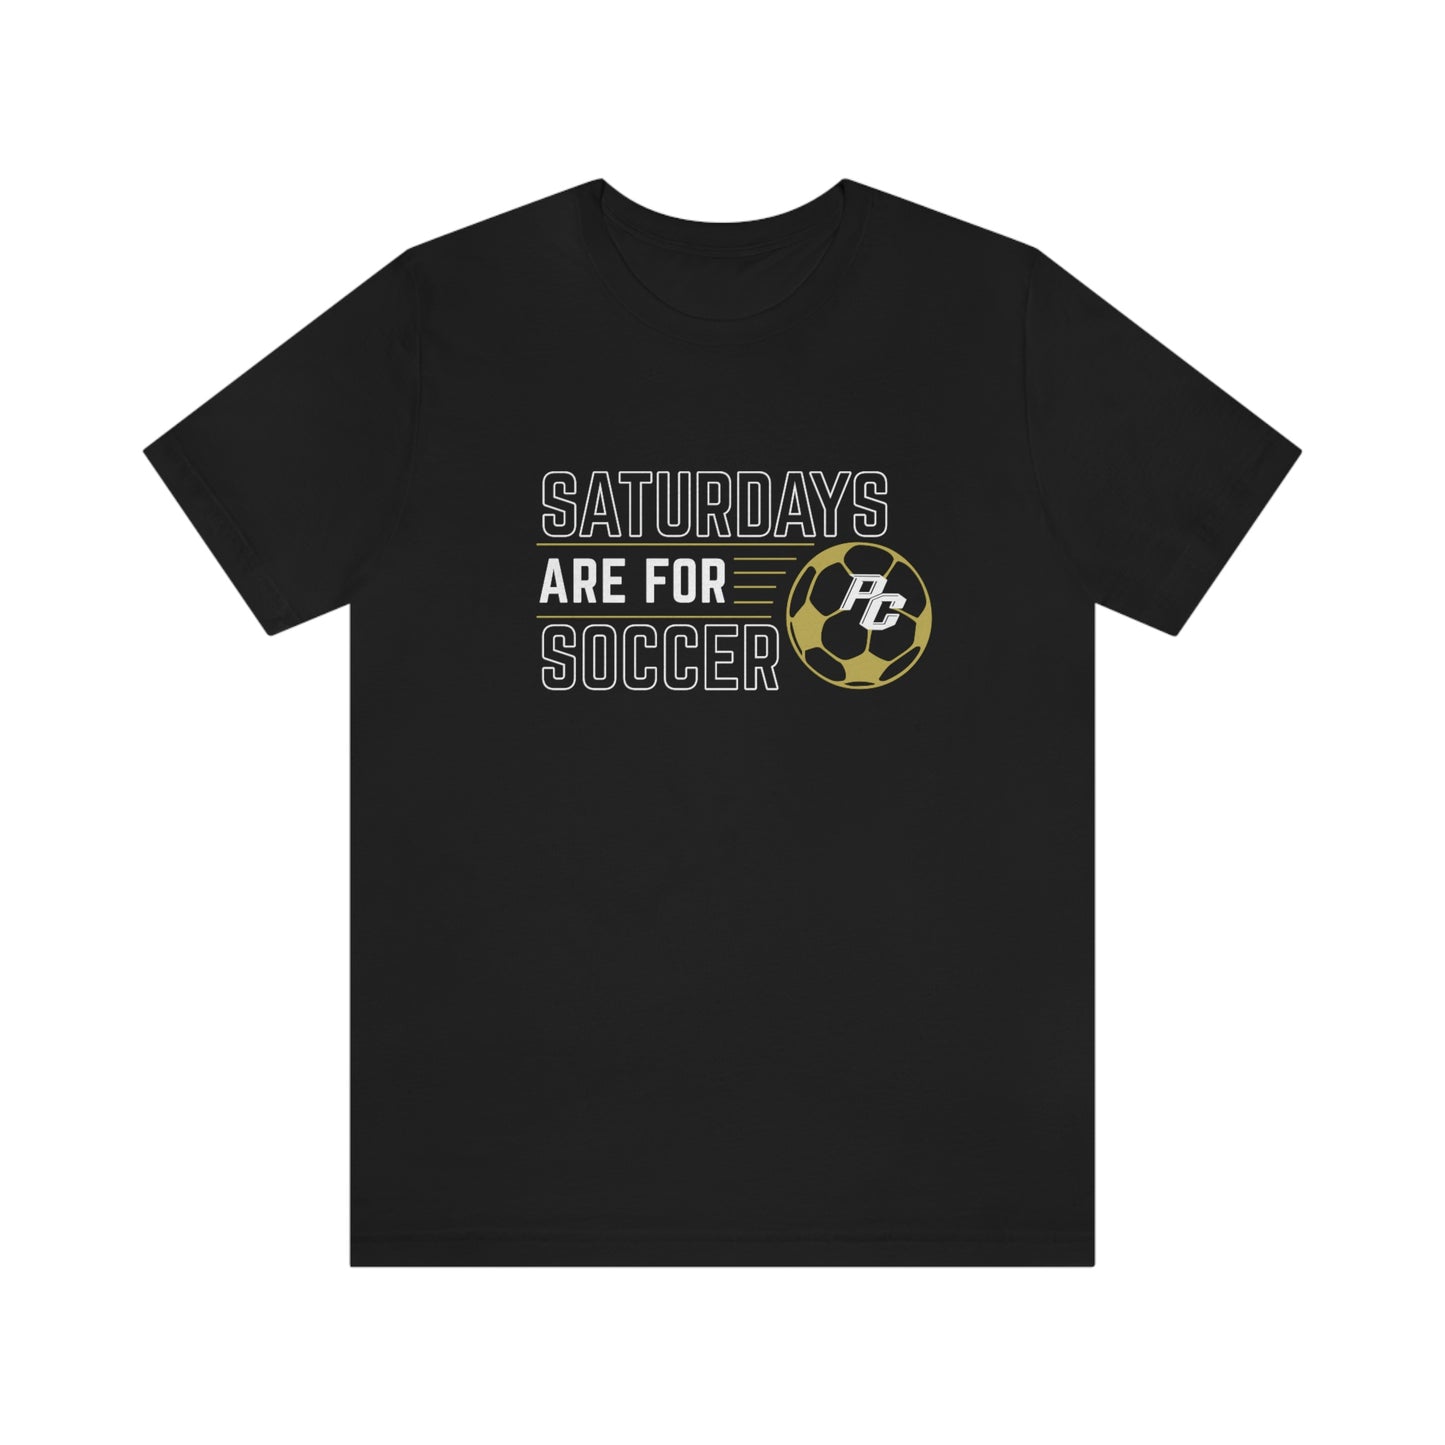 Saturdays are for Soccer - T-Shirt (Black)